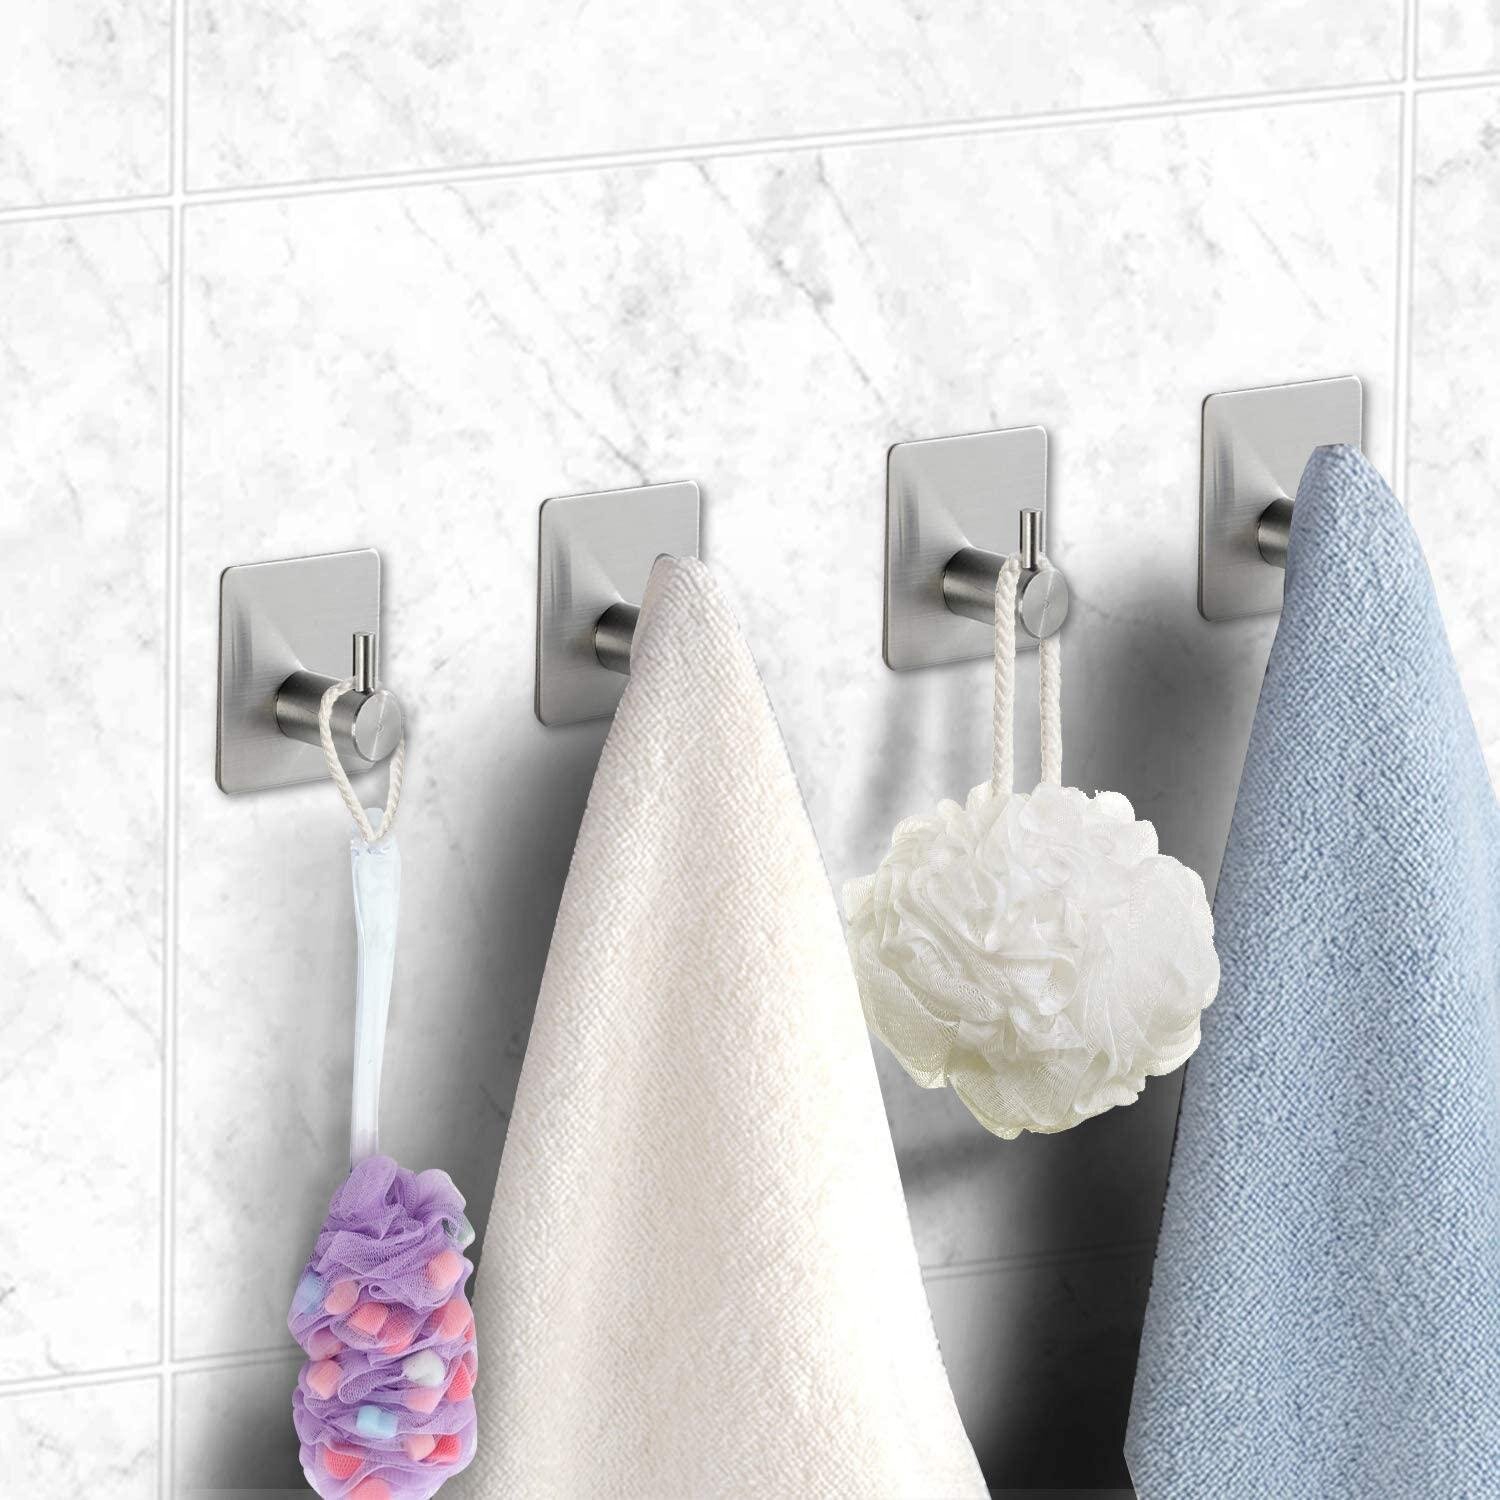 4x Self Adhesive Wall Hook  Hooks Hanger Holder for Clothes Towel Bag 